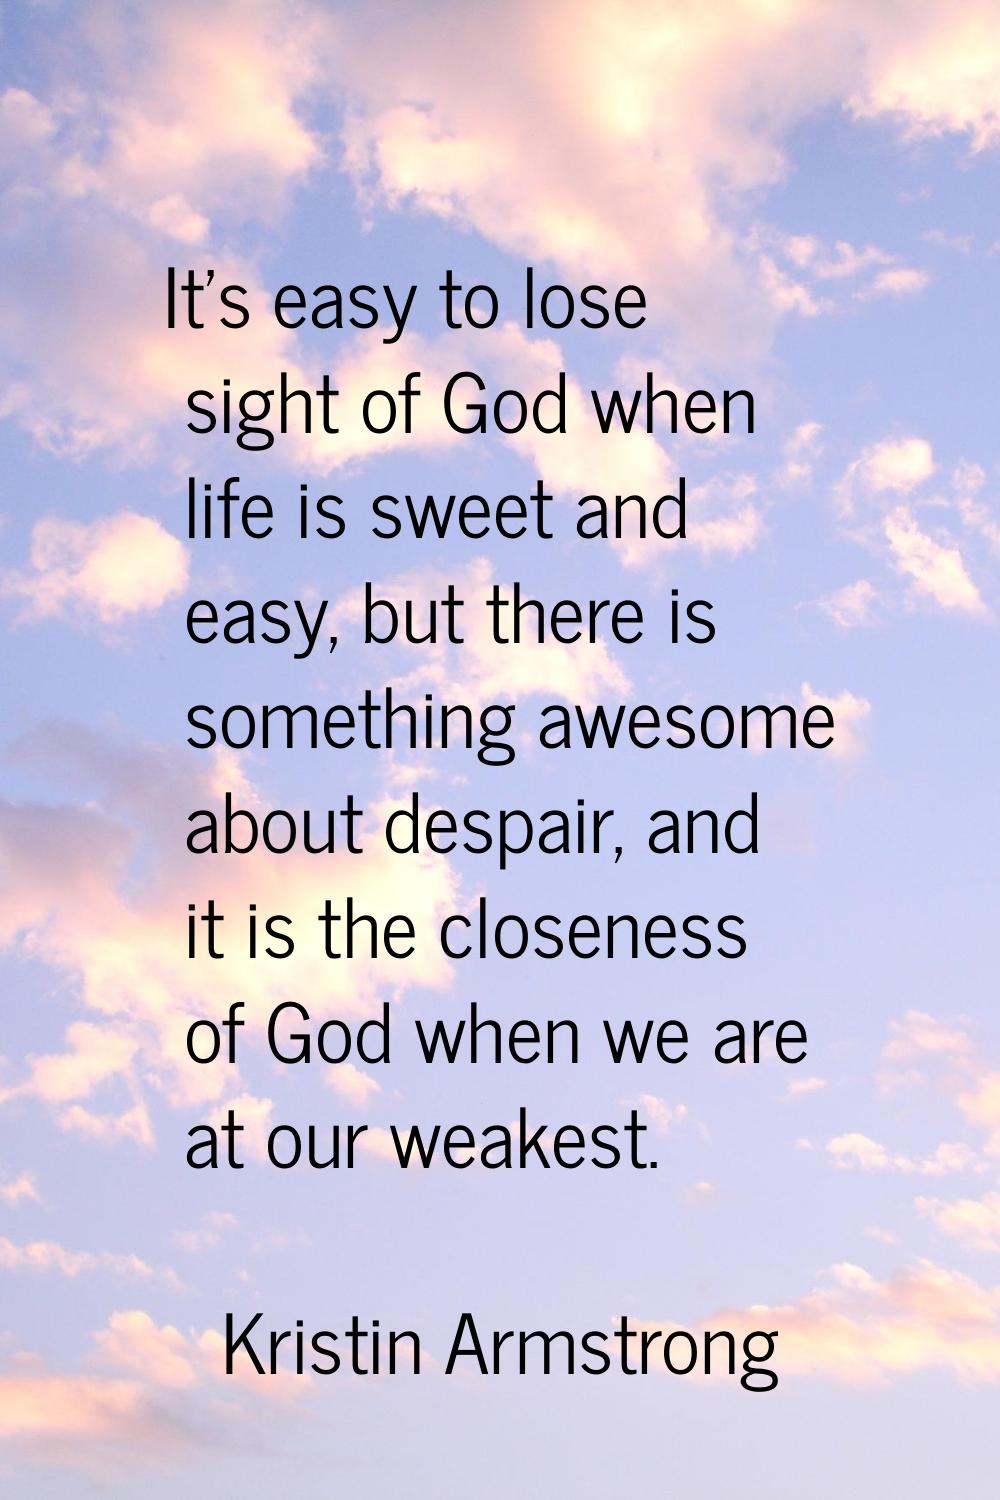 It's easy to lose sight of God when life is sweet and easy, but there is something awesome about de